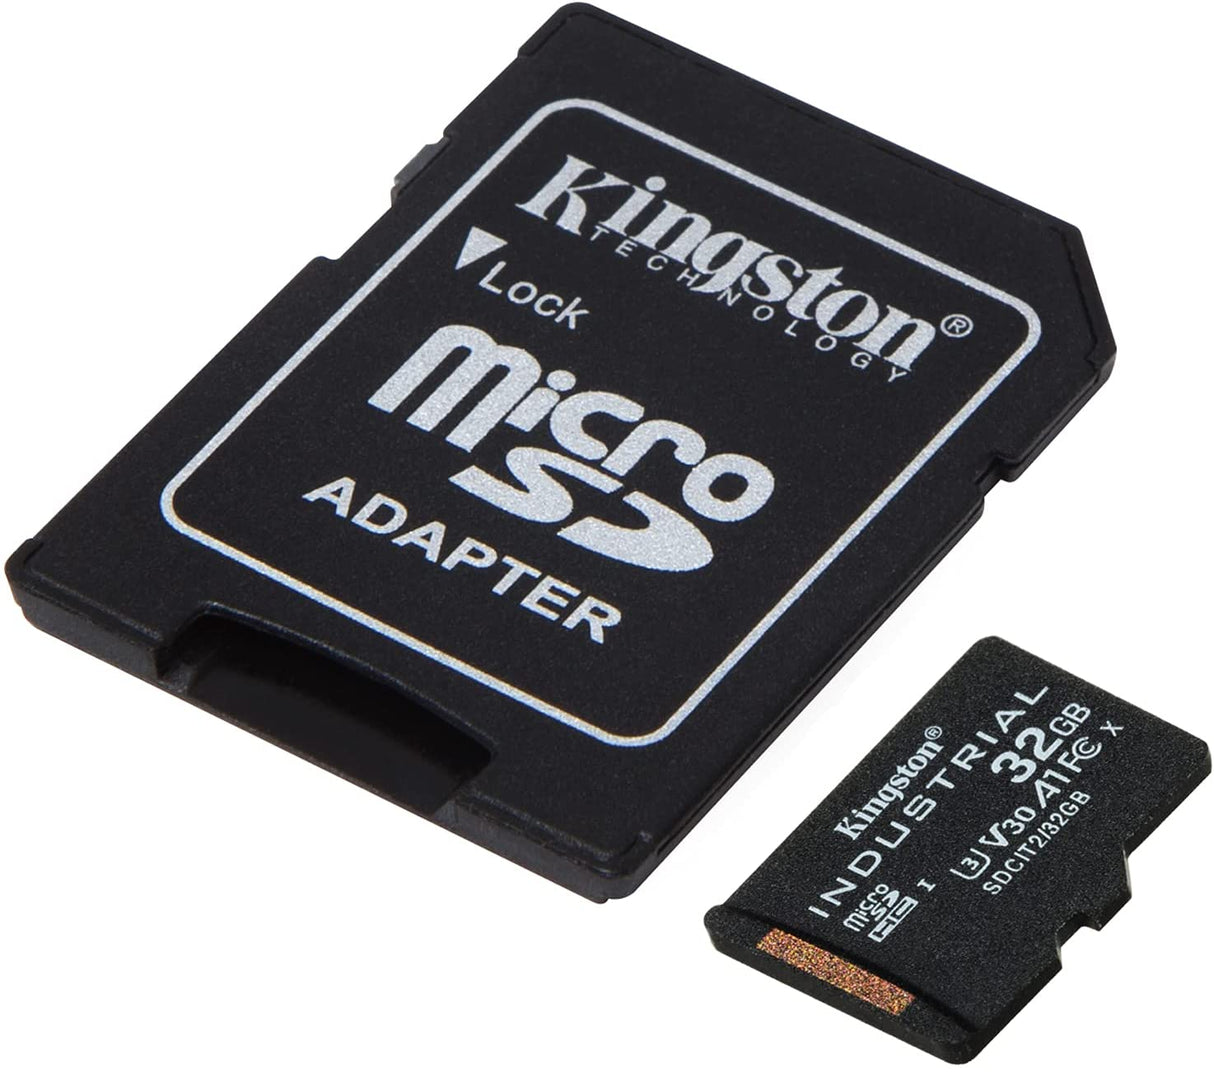 Kingston Industrial 32GB microSDHC C10 A1 pSLC Card + SD Adapter SDCIT2/32GB With Adapter 32GB